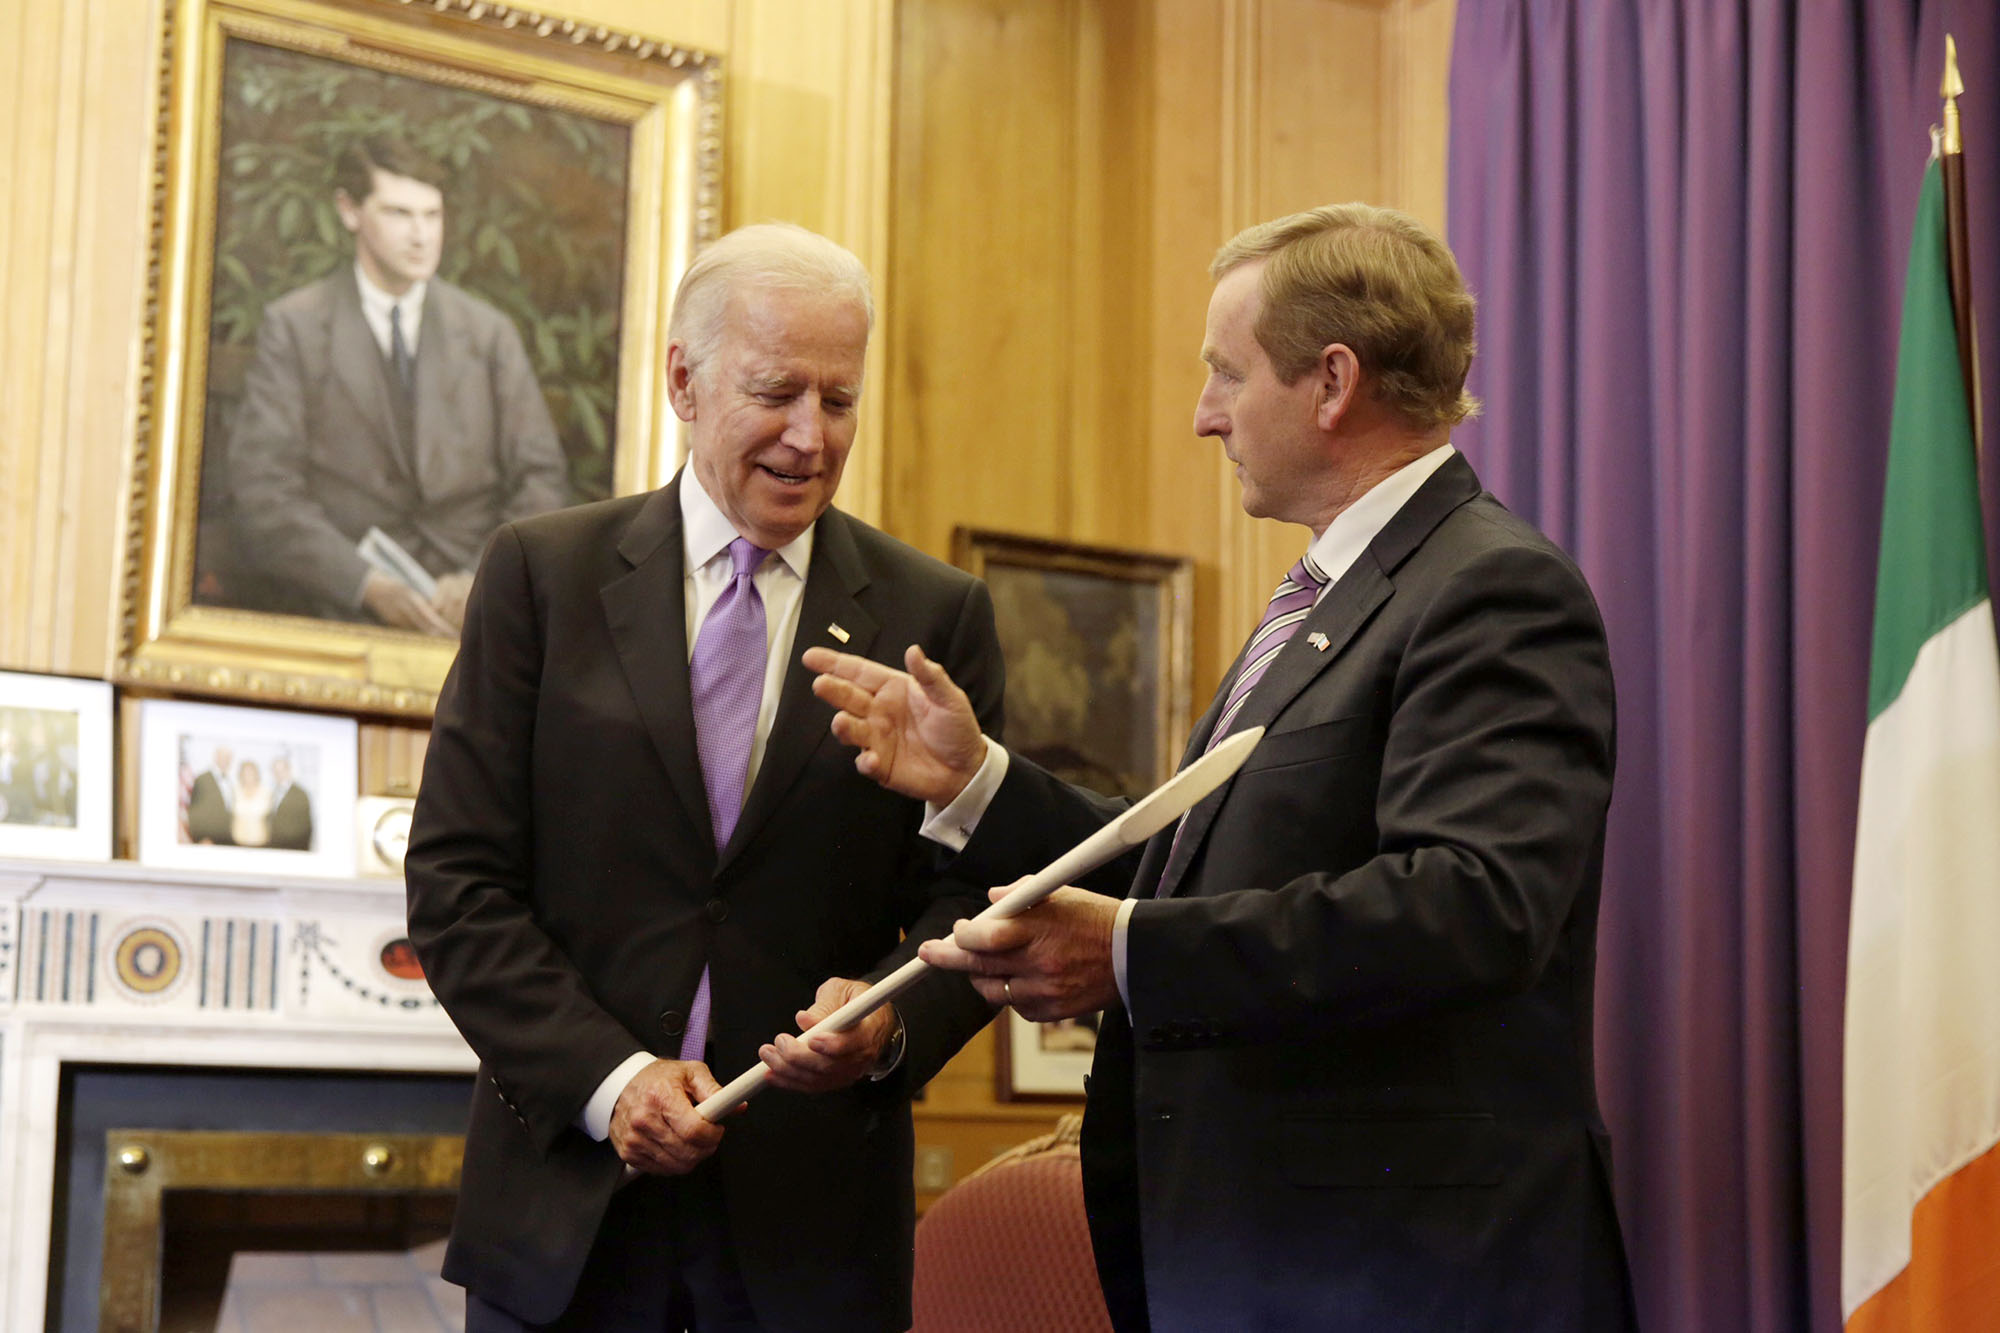 Vice President Joe Biden is given a cricket bat by Taoiseach Enda Kenny before their bilateral meeting at the government building in Dublin, Ireland, June 21, 2016. (Official White House Photo by David Lienemann)